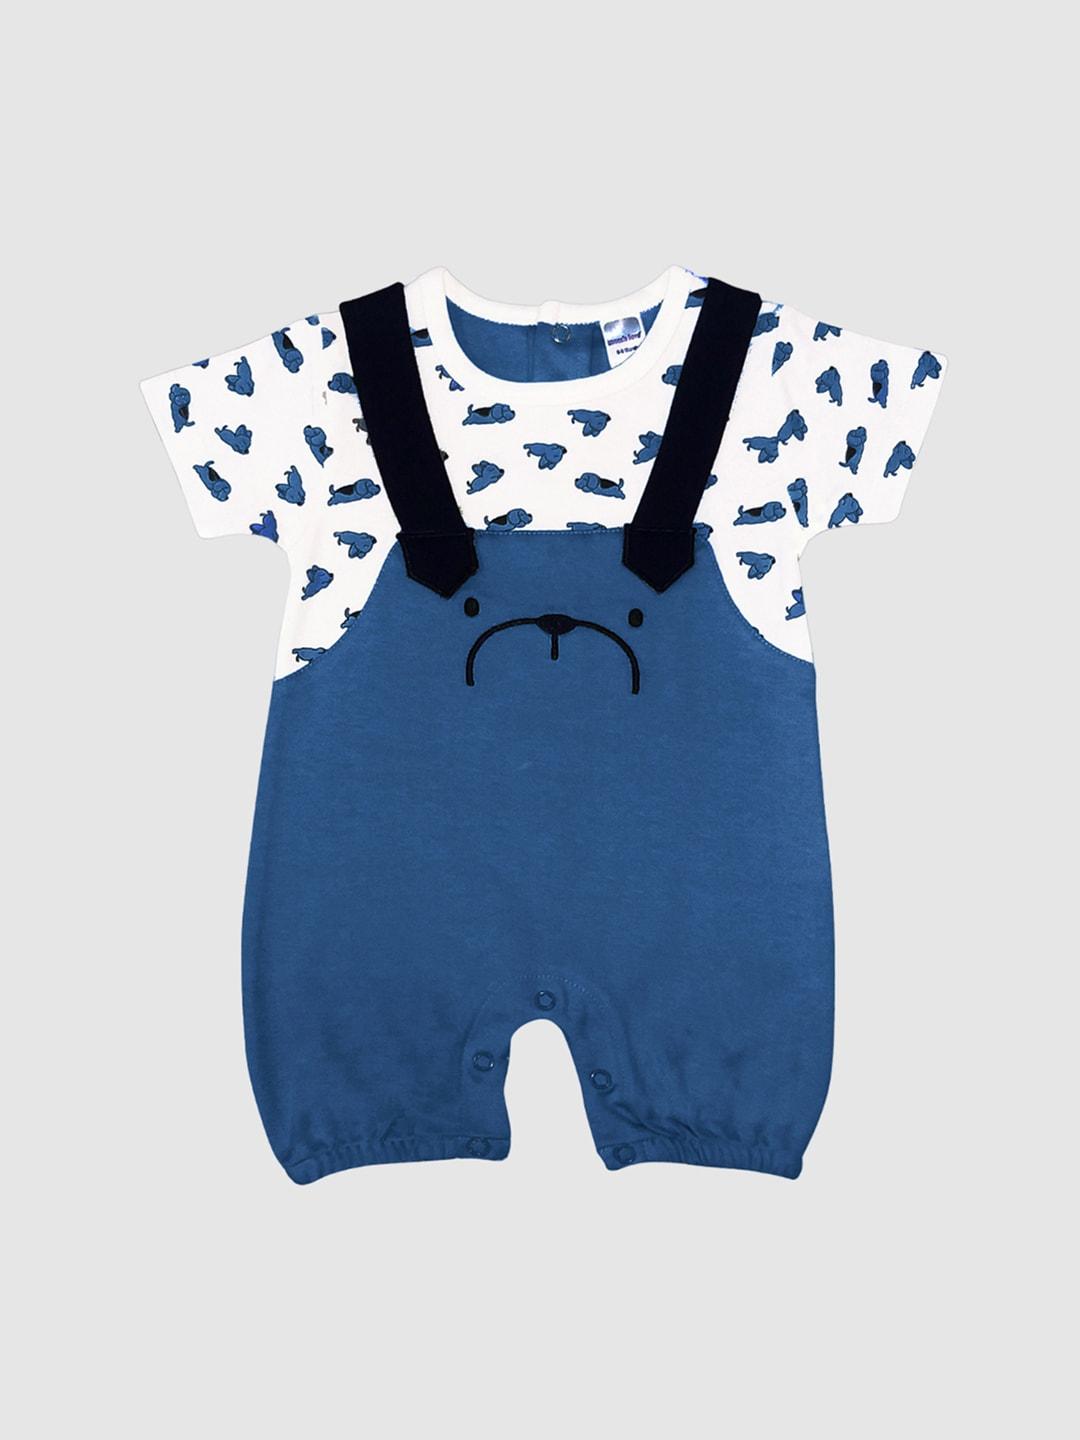 moms-love-infant-girls-printed-cotton-rompers